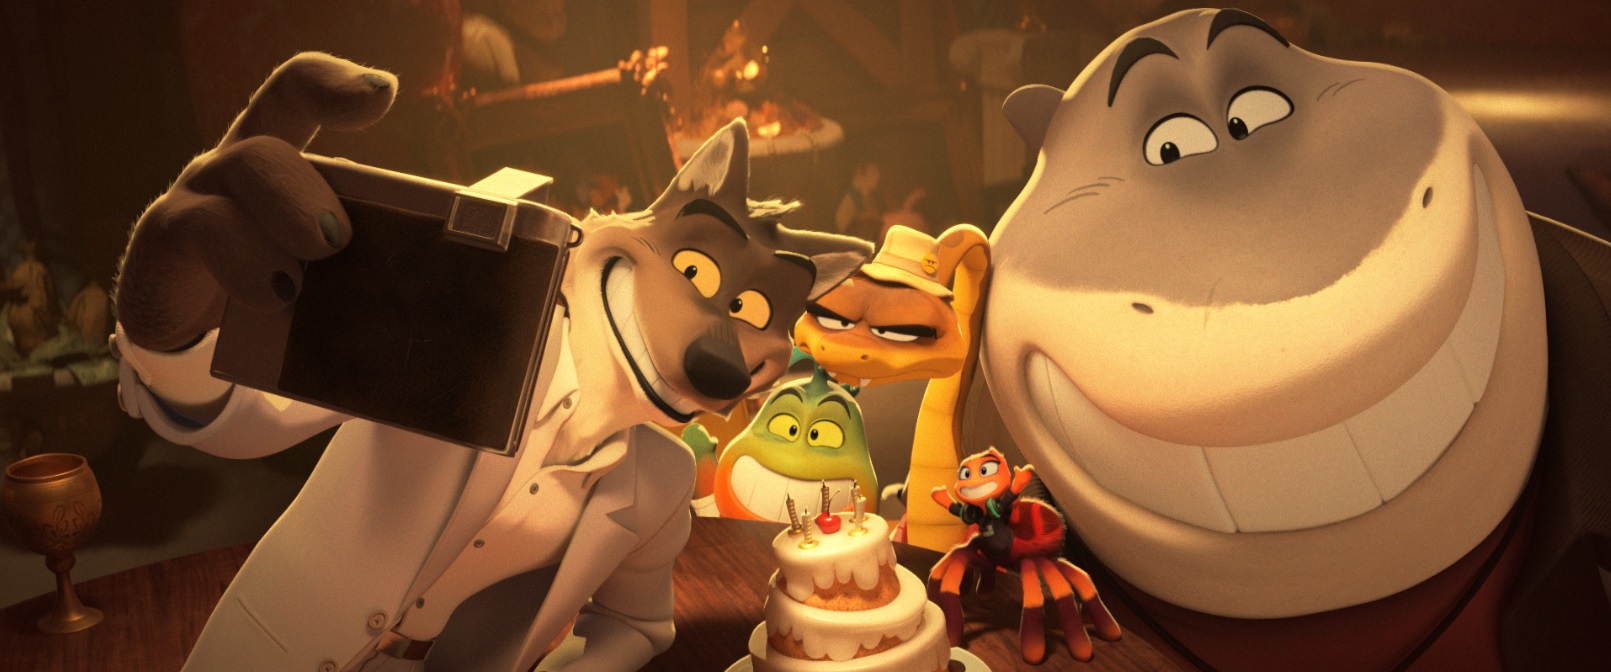 (from left) Mr. Wolf (Sam Rockwell), Mr. Piranha (Anthony Ramos), Mr. Snake (Marc Maron), Ms. Tarantula (Awkwafina) and Mr. Shark (Craig Robinson) in DreamWorks Animation’s The Bad Guys, directed by Pierre Perifel.